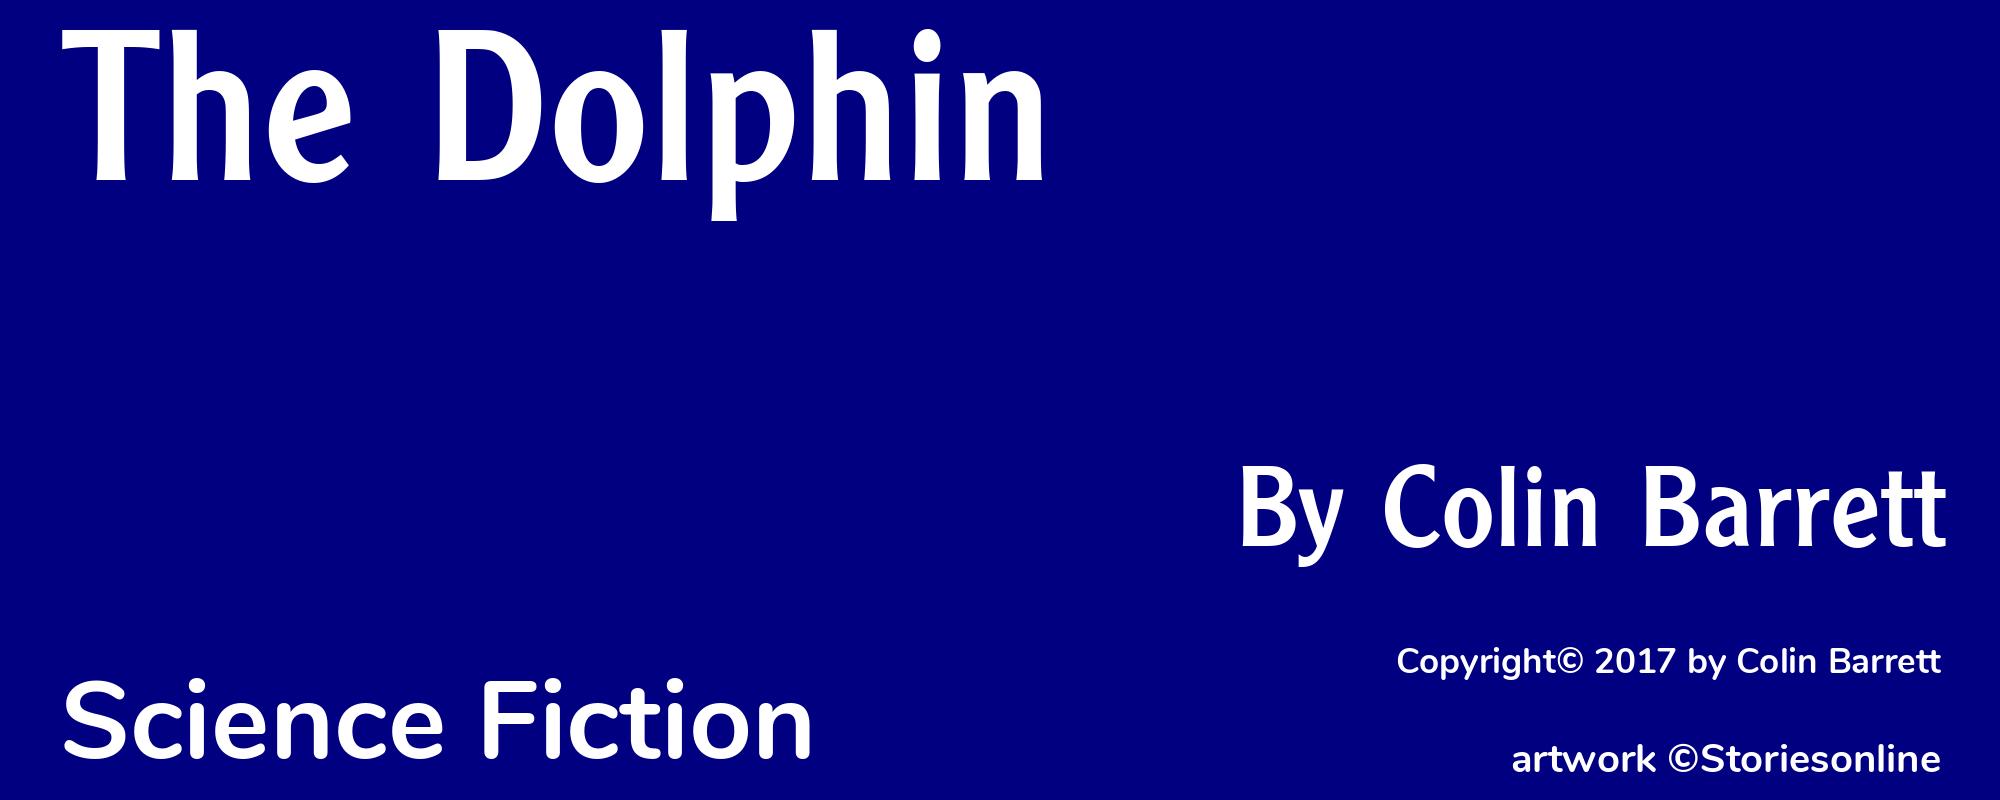 The Dolphin - Cover